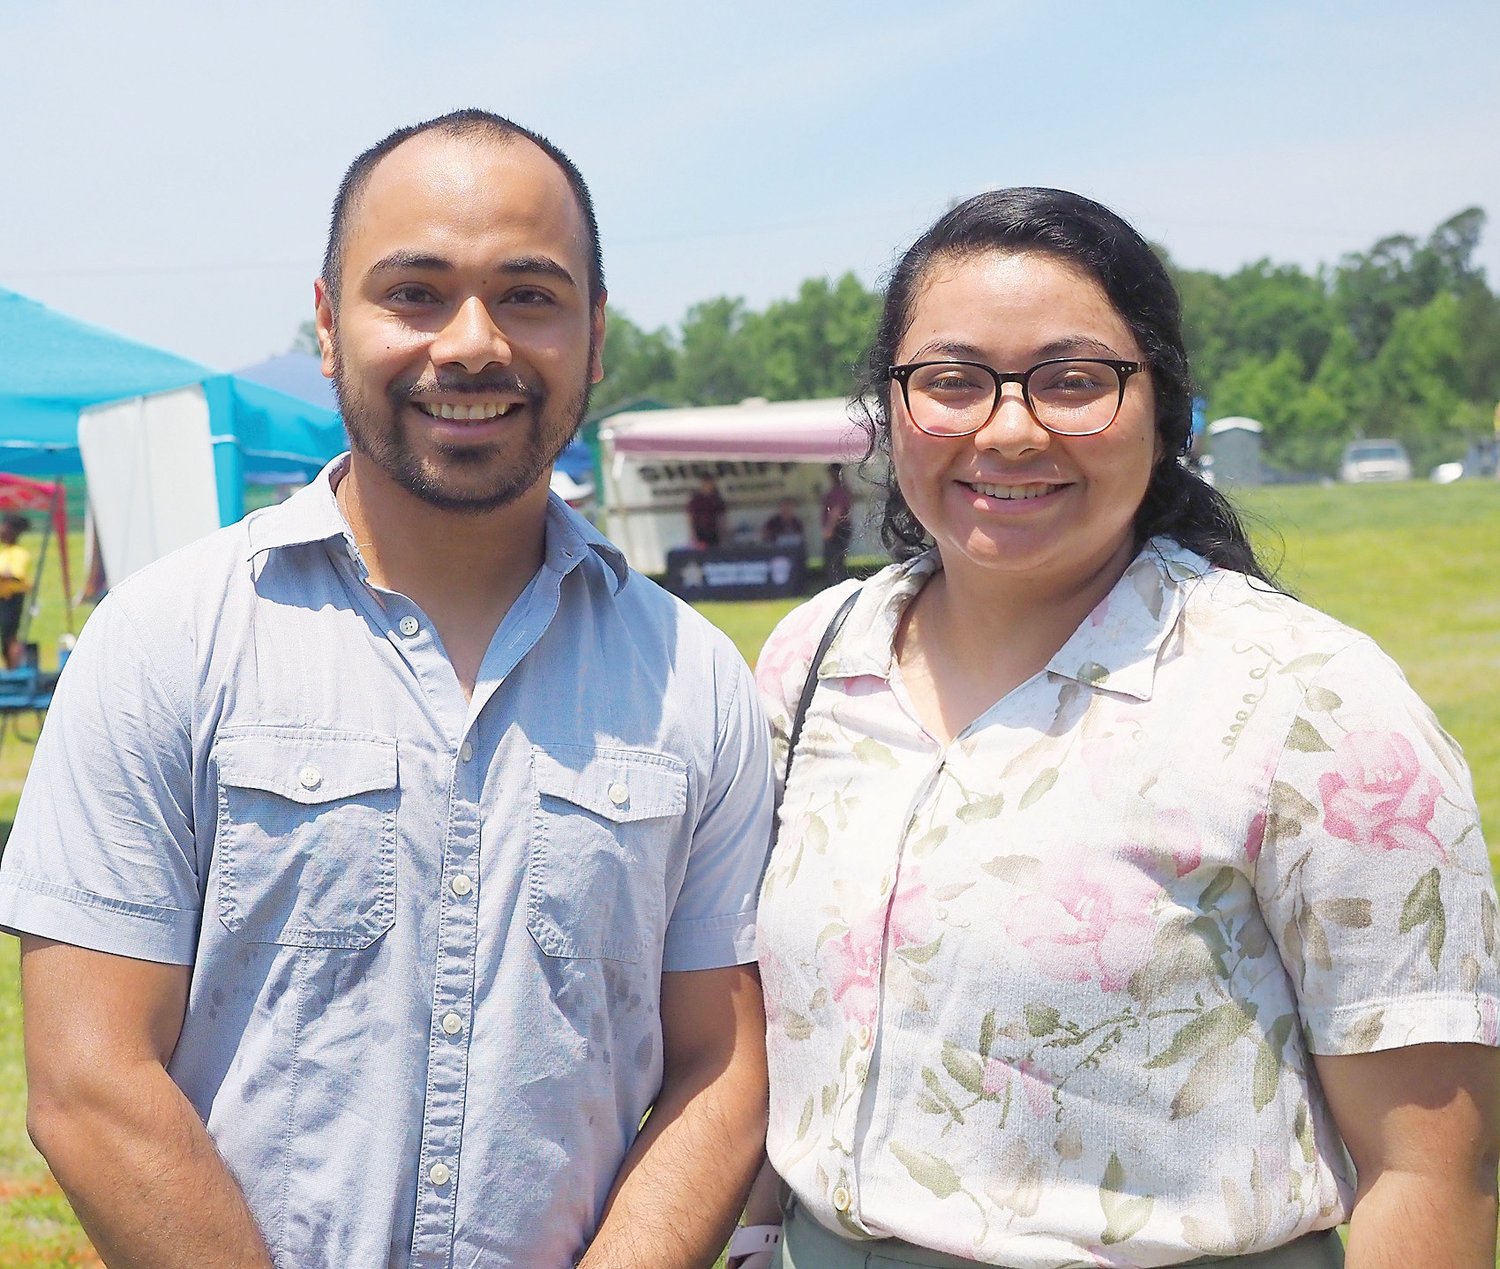 Franklin Gomez Flores and his sister, Maria Gomez Flores, at CORE's Juneteenth celebration last summer in Pittsboro. 'I do not identify as Latinx, but I do recognize that when Latinx is used, the user is referring to my community and that I may be included,' said Gomez Flores, who is Chatham's first Latino commissioner. 'I believe we all have the freedom of expression.'